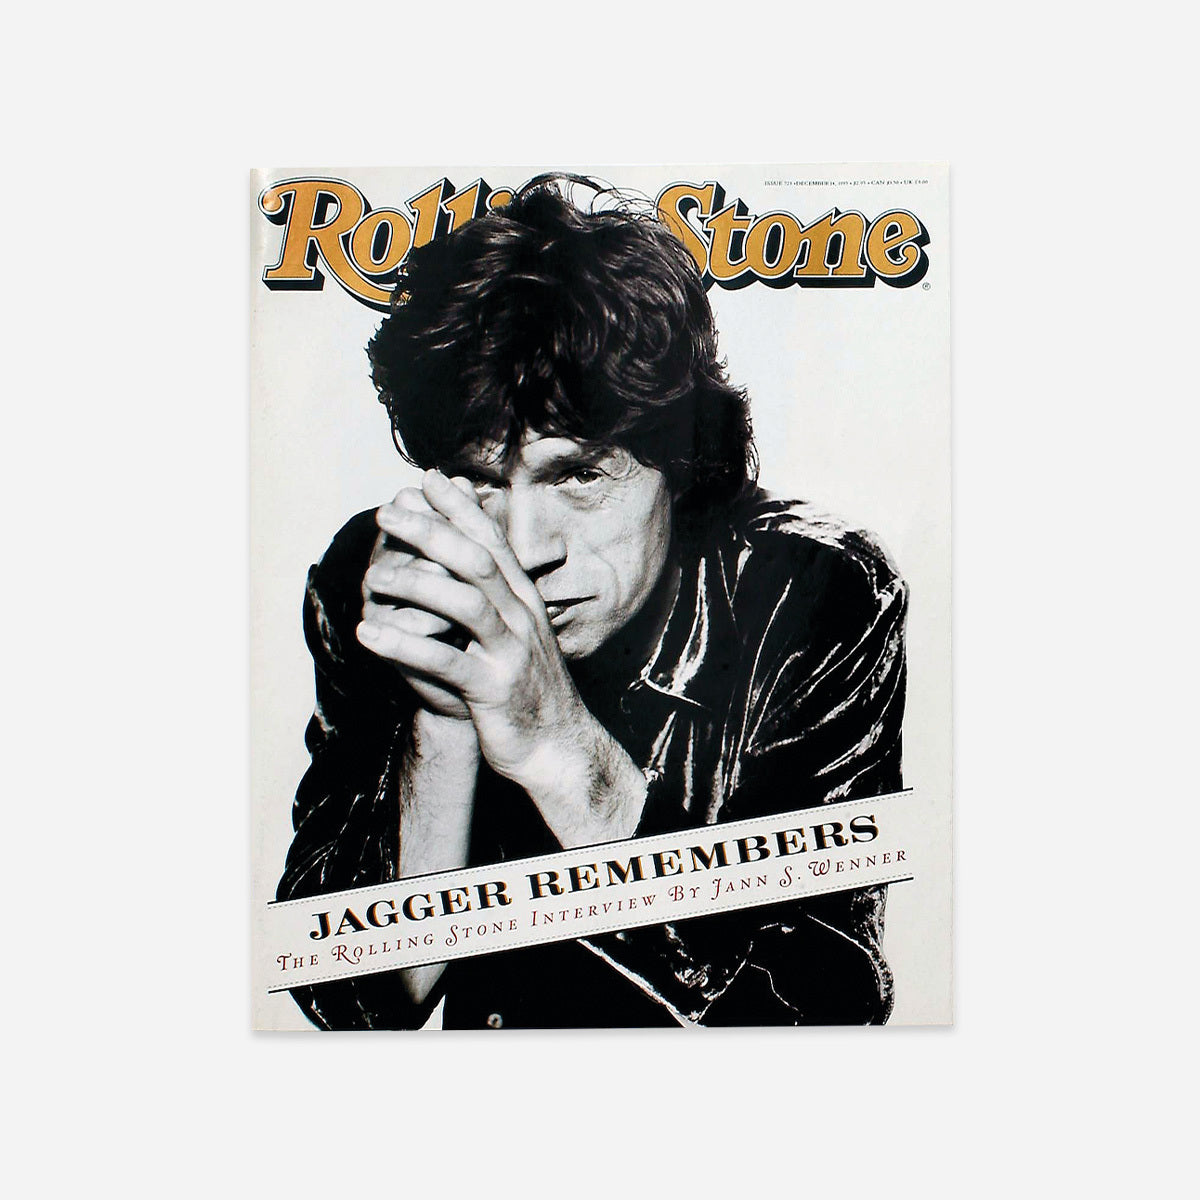 Rolling Stone Magazine December 14, 1995 Featuring Mick Jagger (Issue 723)